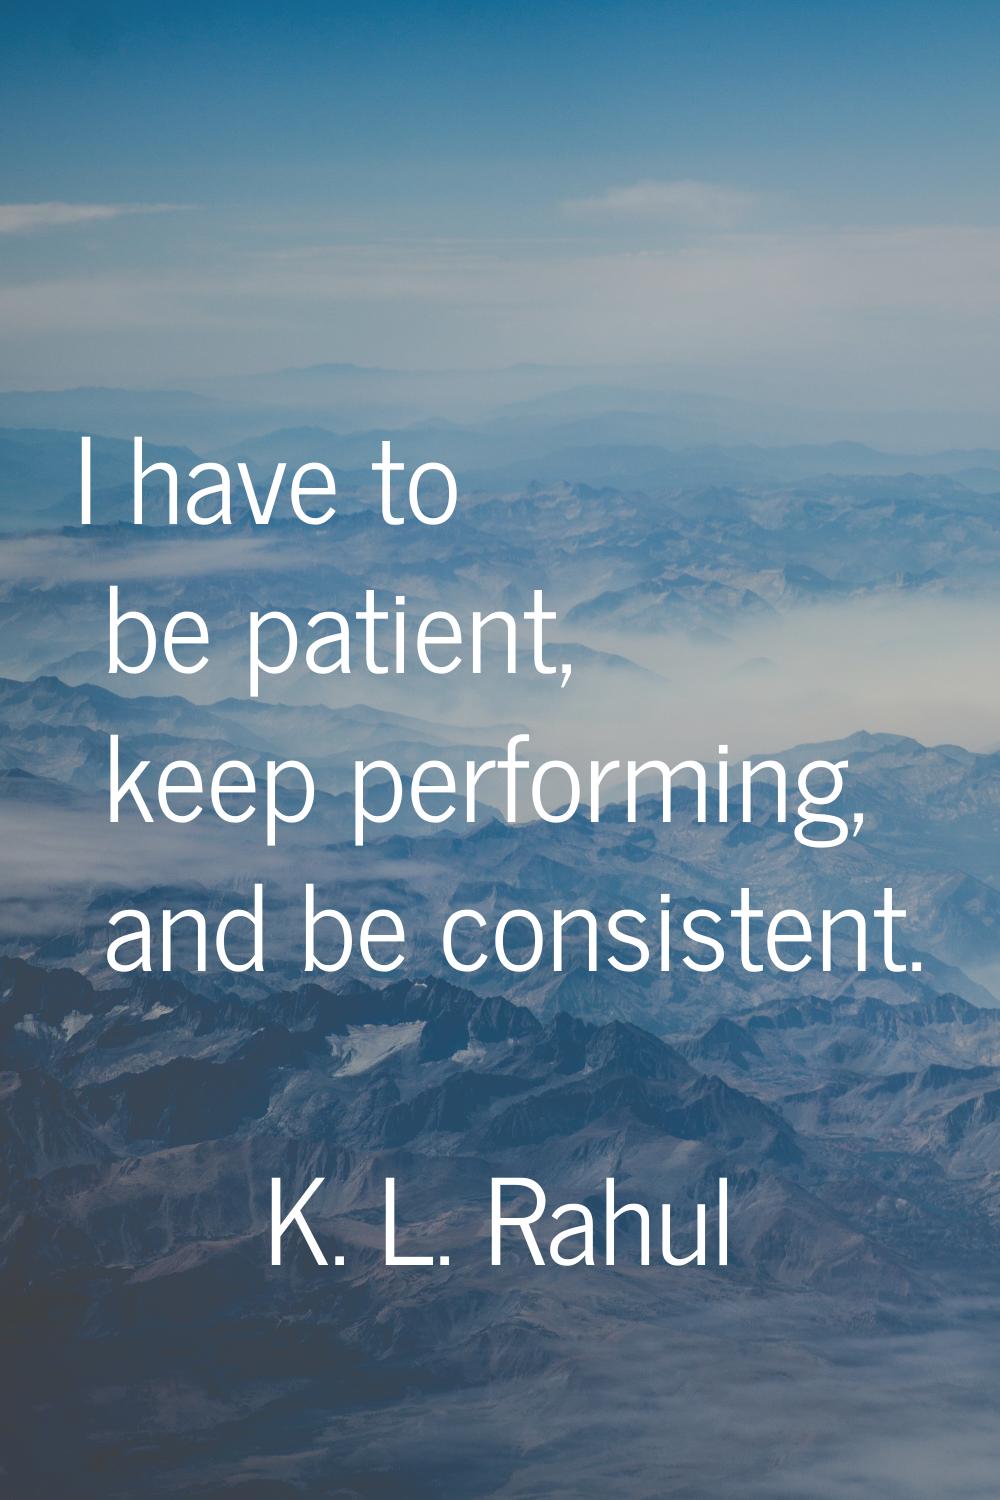 I have to be patient, keep performing, and be consistent.